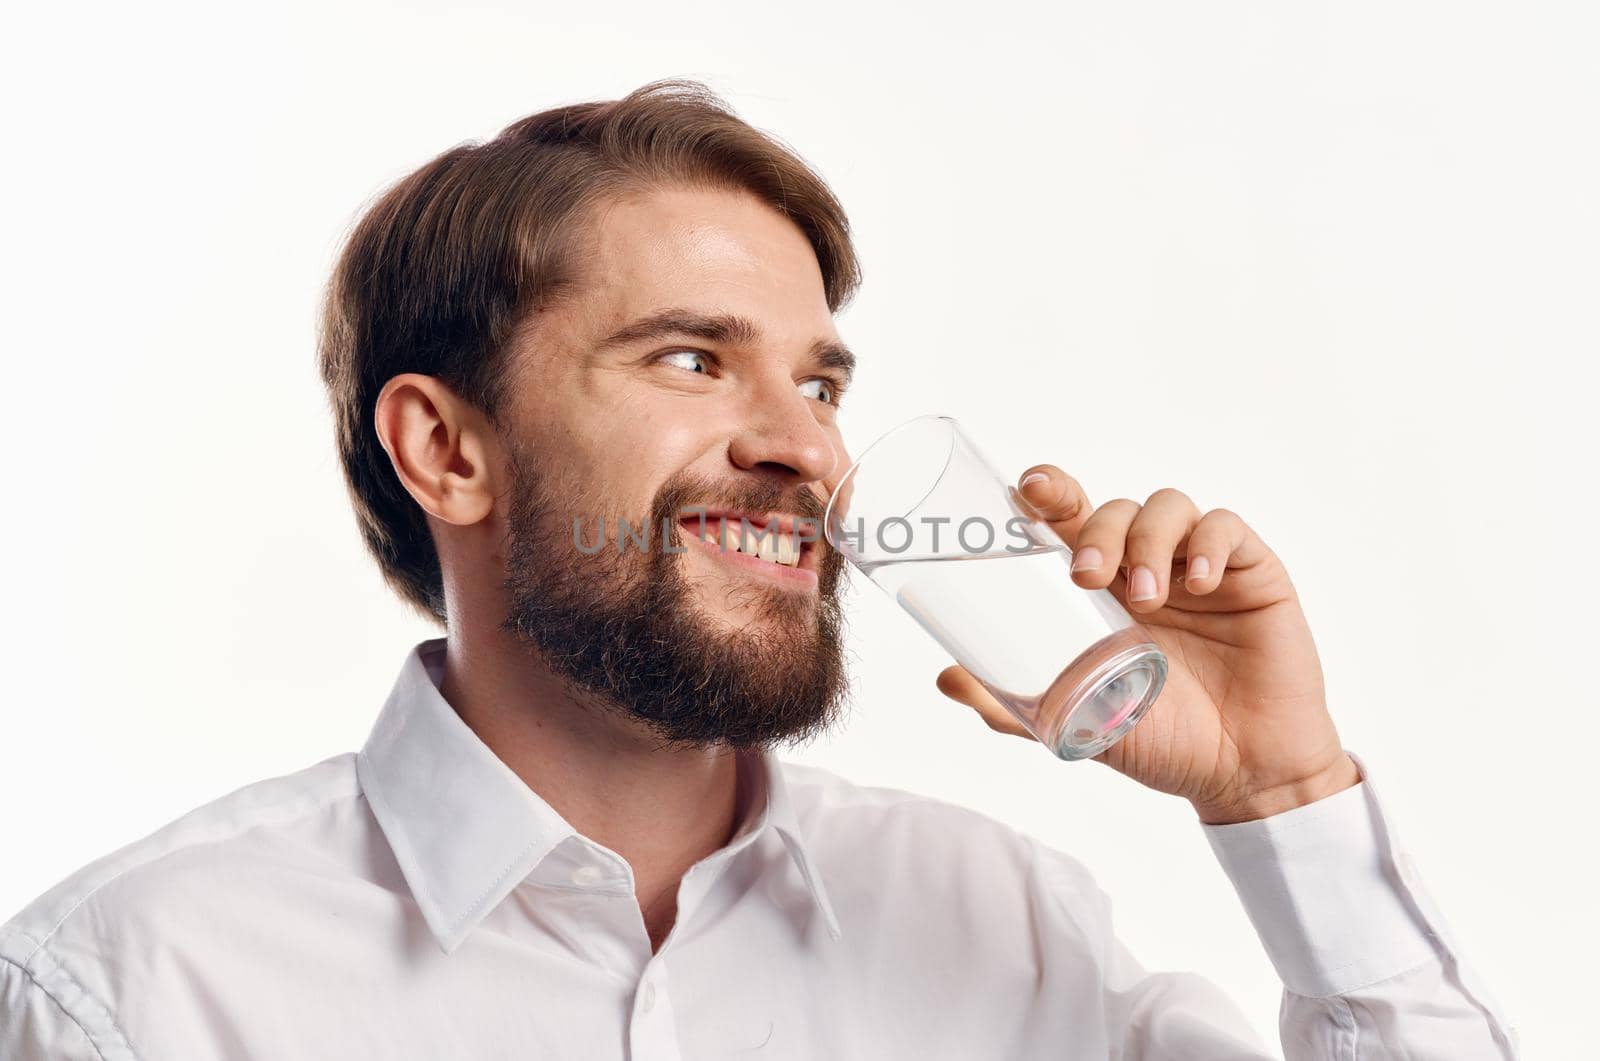 happy man drinks water from a glass on a light background white shirt portrait model by SHOTPRIME